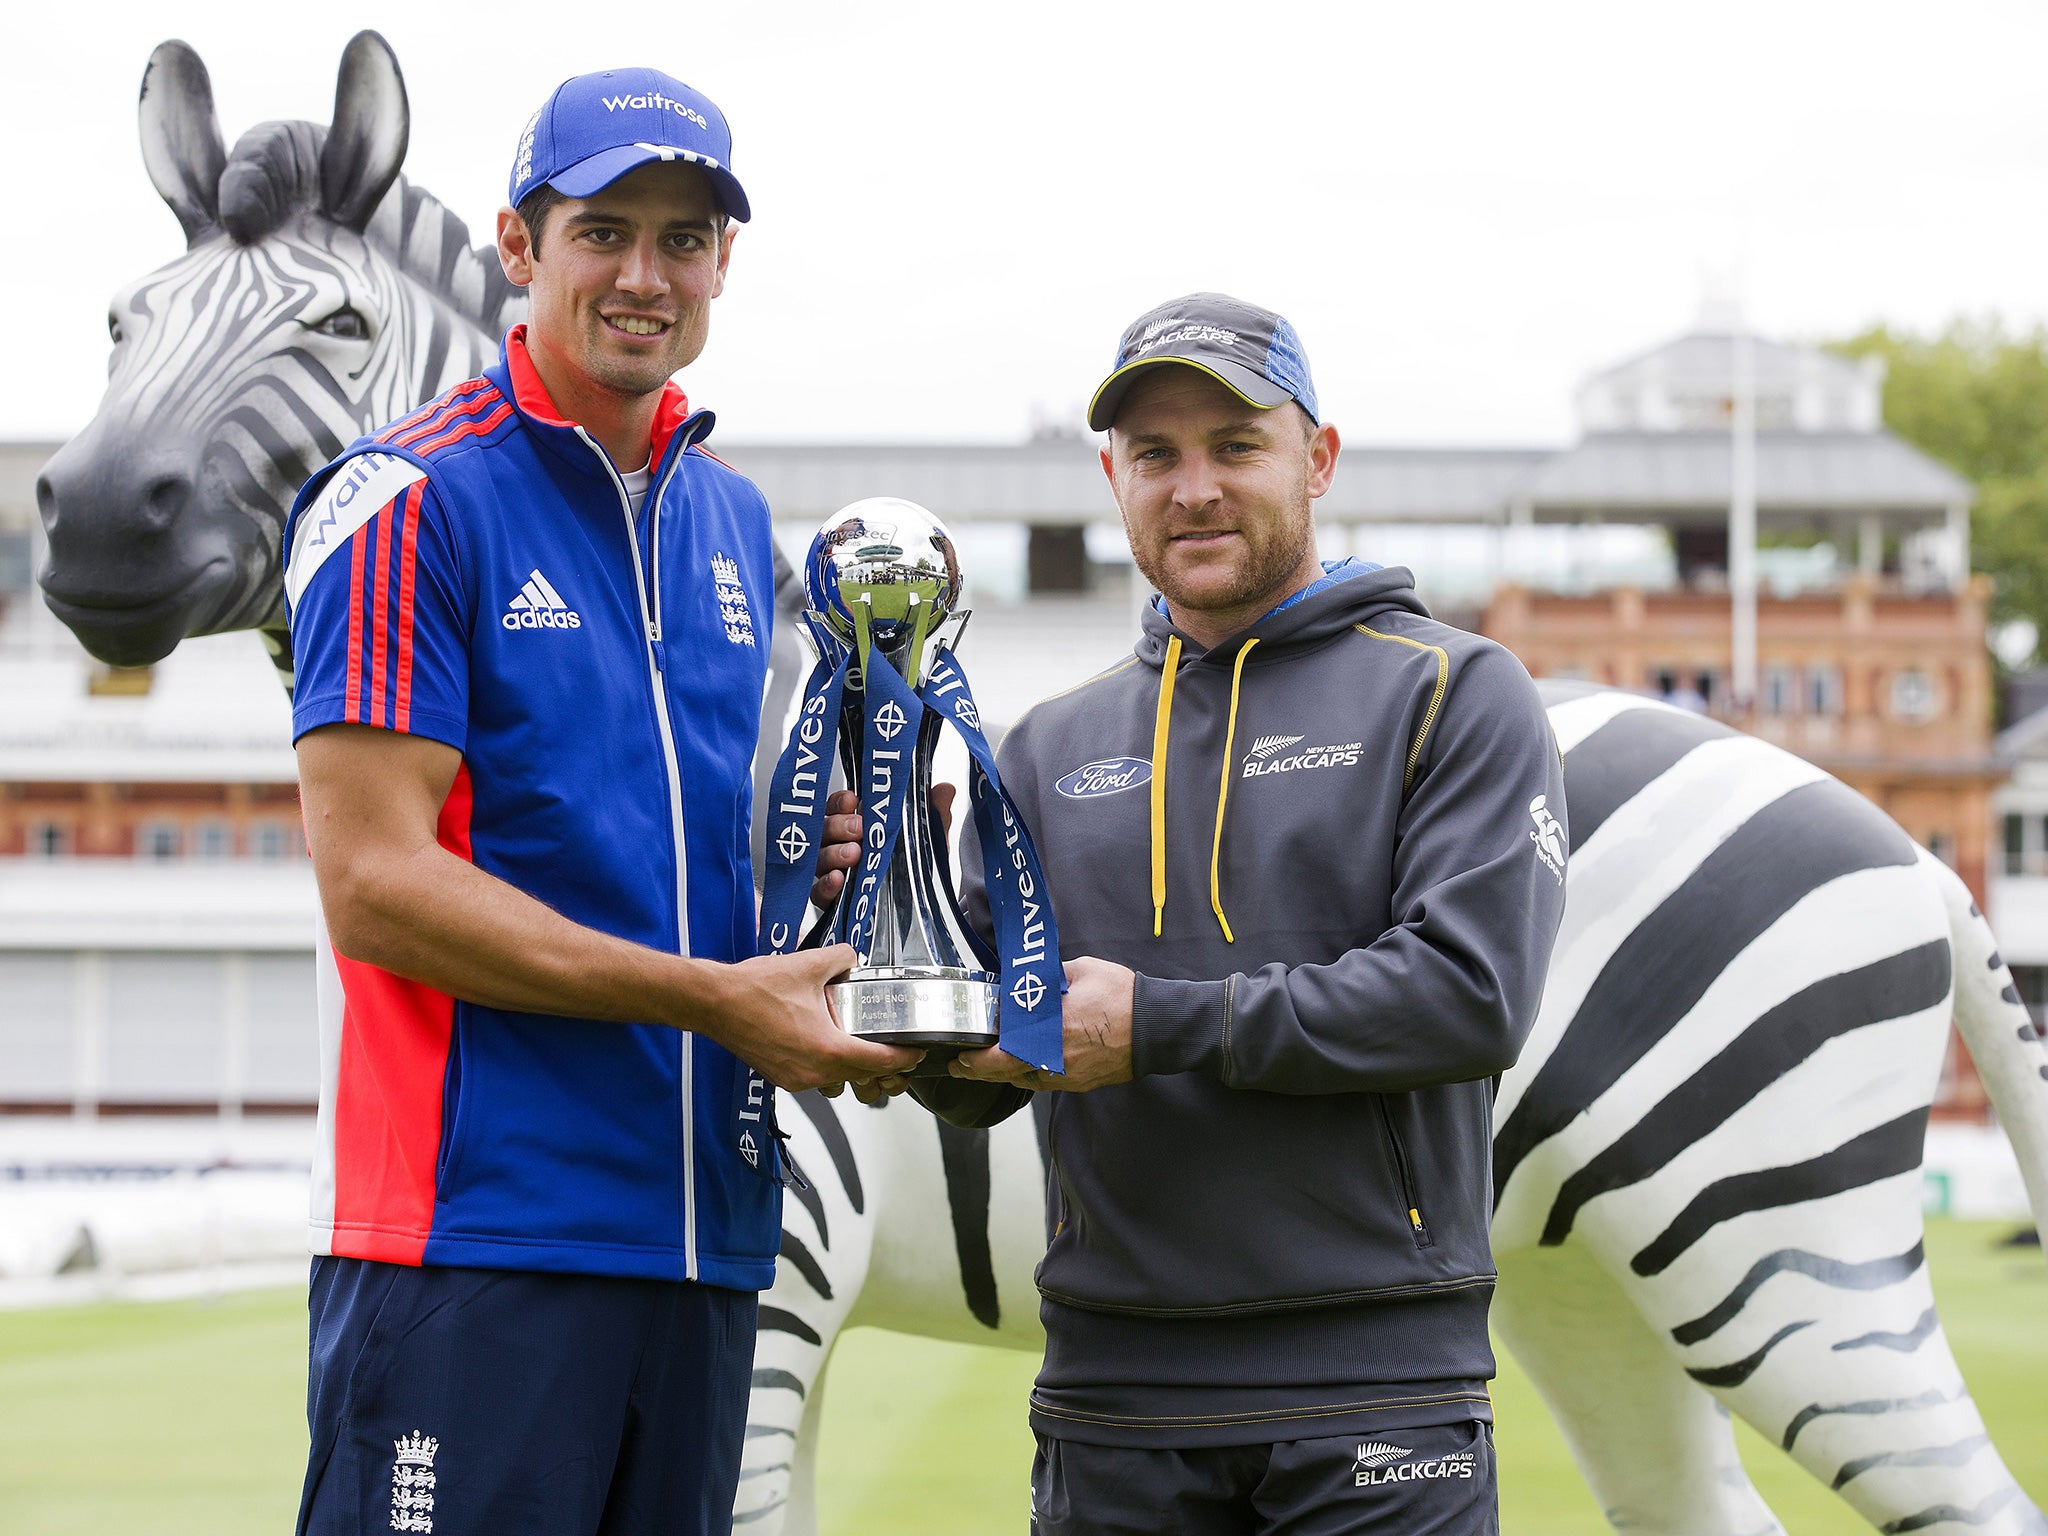 Alastair Cook and Brendan McCullum, his opposite number, before the Test series